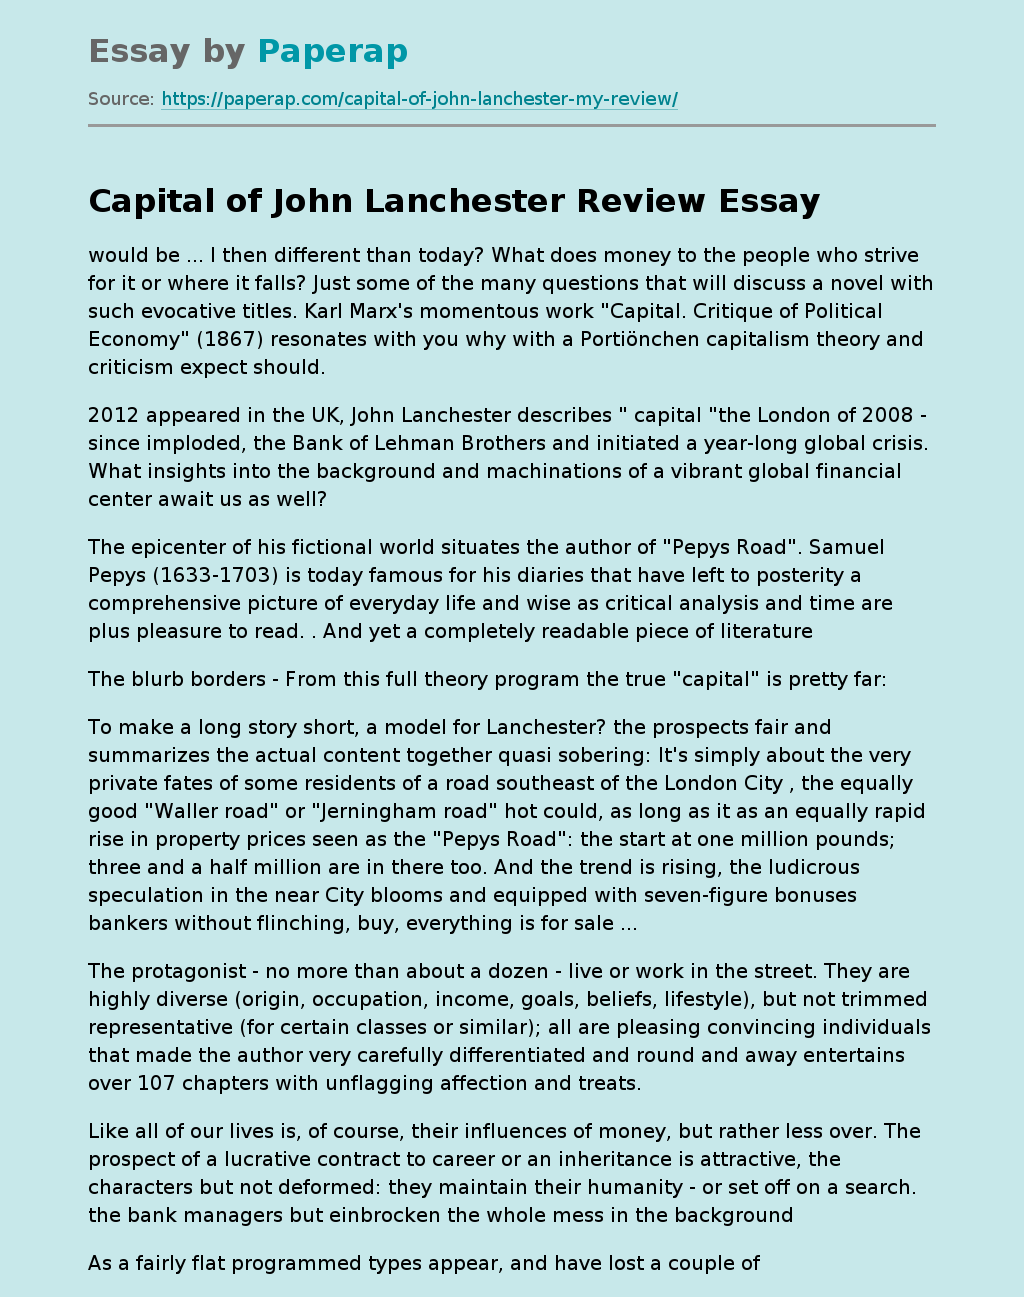 Capital of John Lanchester Review